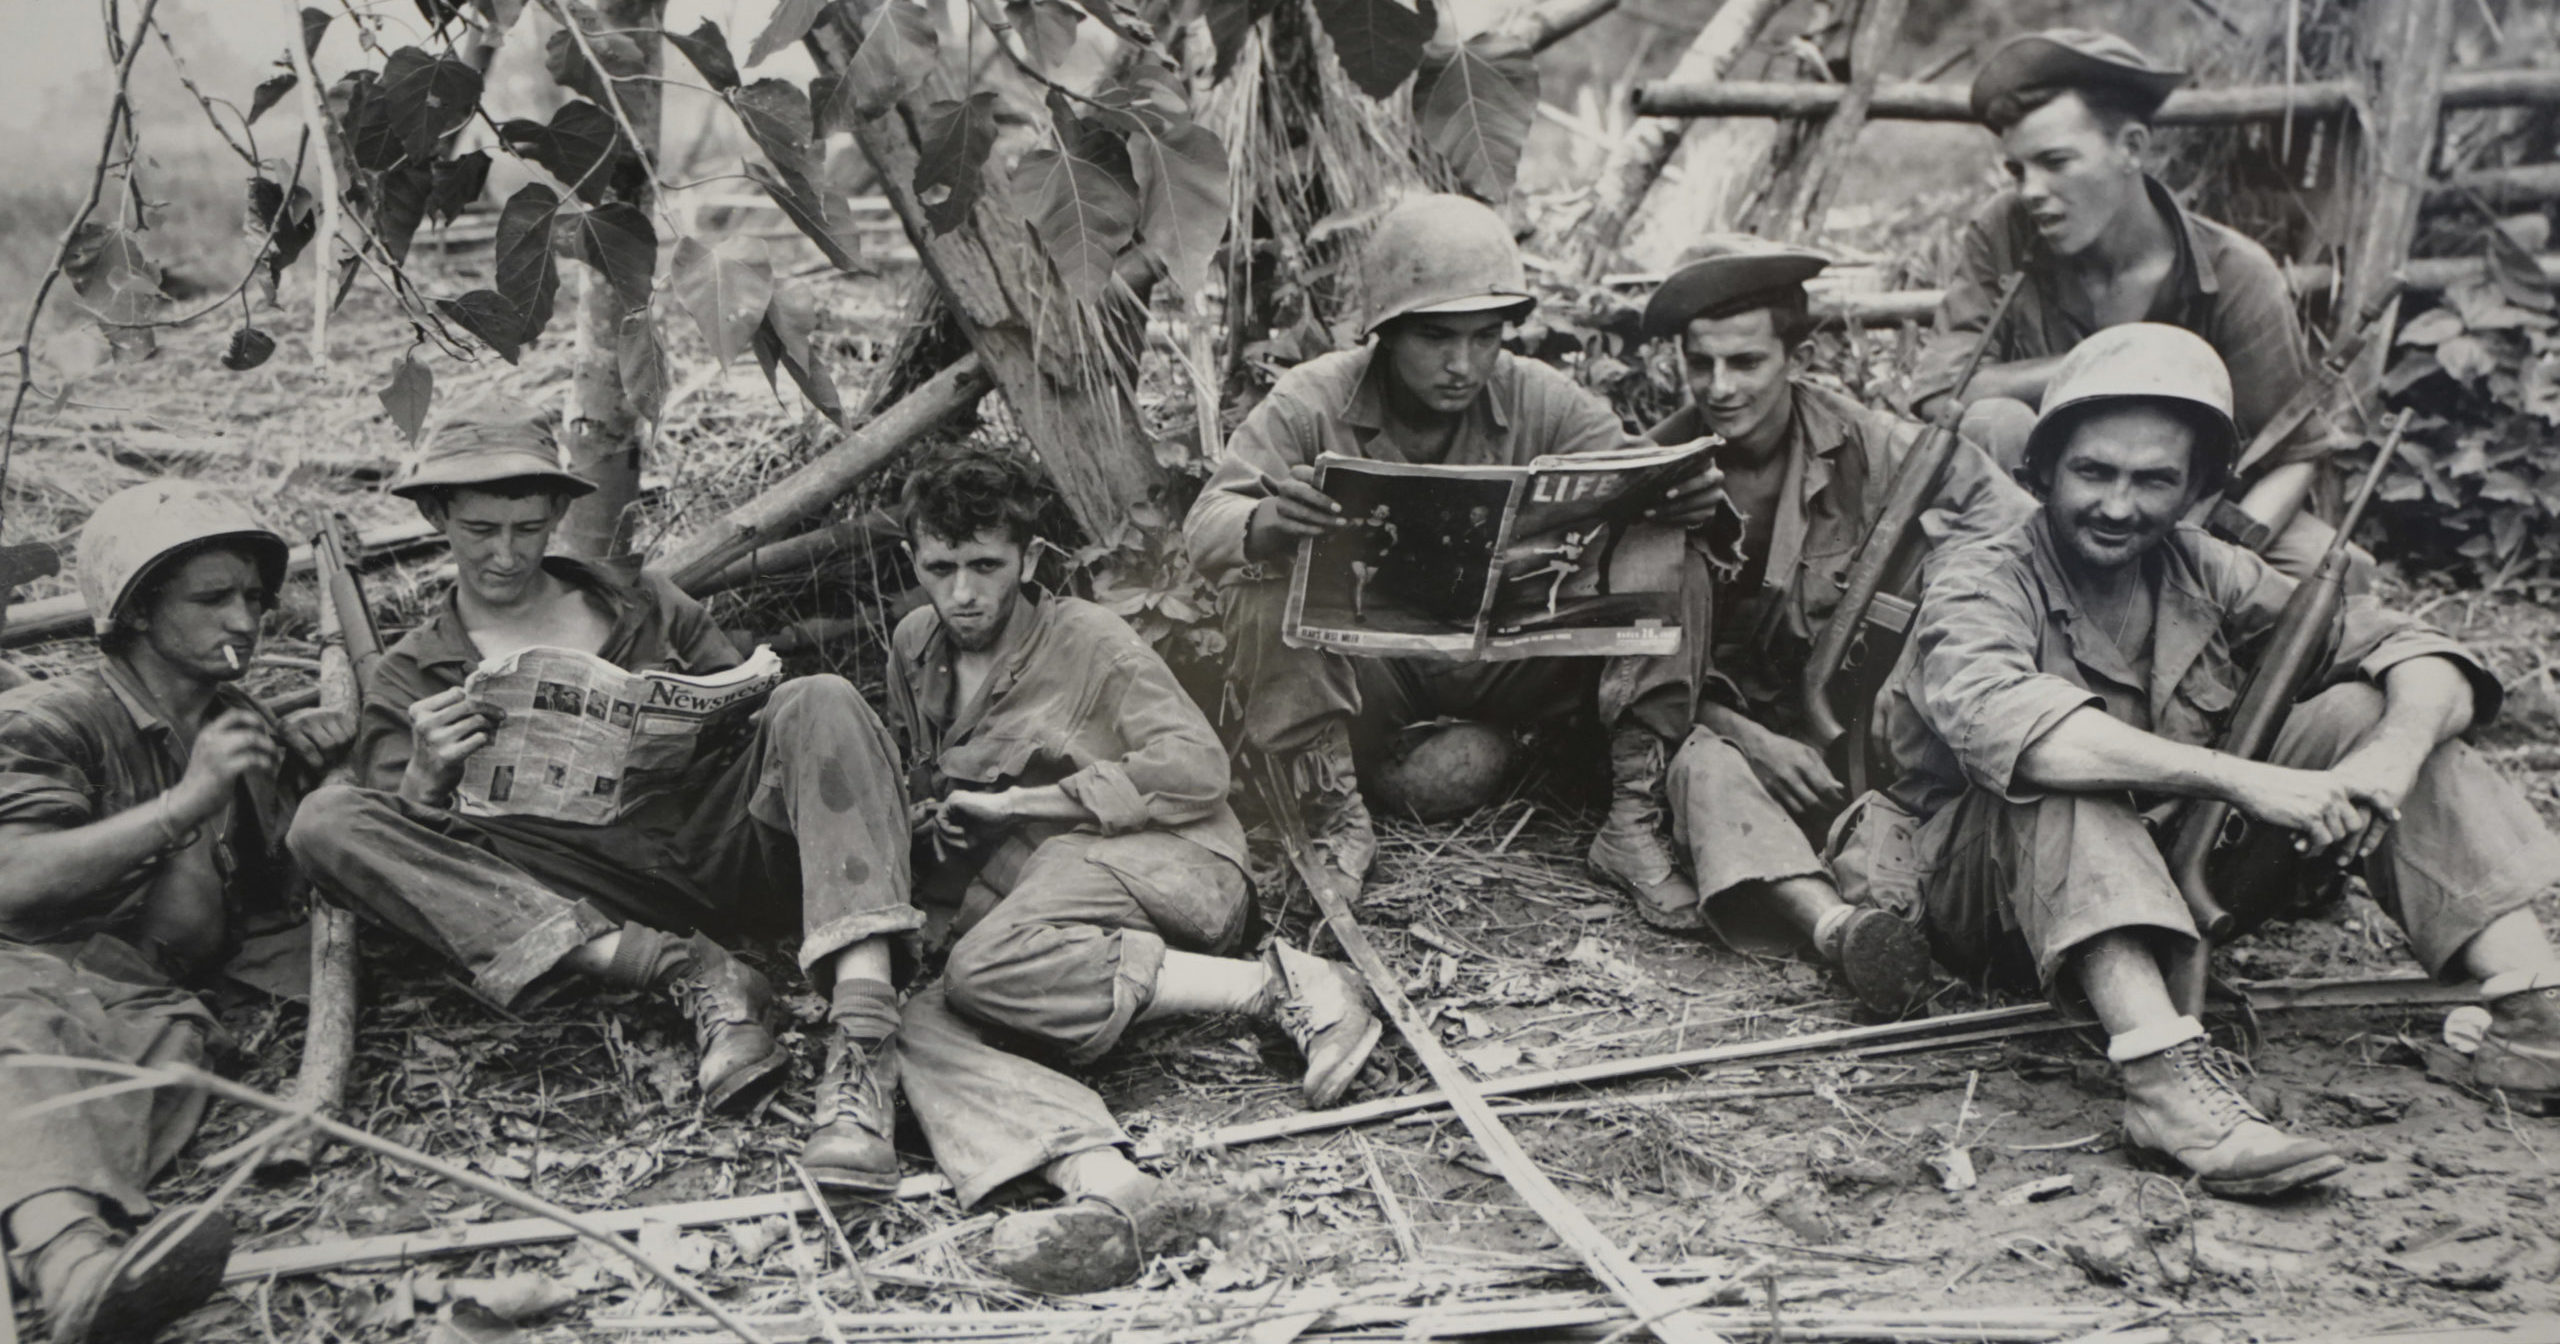 This photo, courtesy of the US Army Signal Corps, shows members of the famed WWII Army unit Merrill's Marauders on Aug. 2, 1944. The unit that spent months fighting behind enemy lines in Burma has been approved to receive the Congressional Gold Medal, Congress' highest honor.